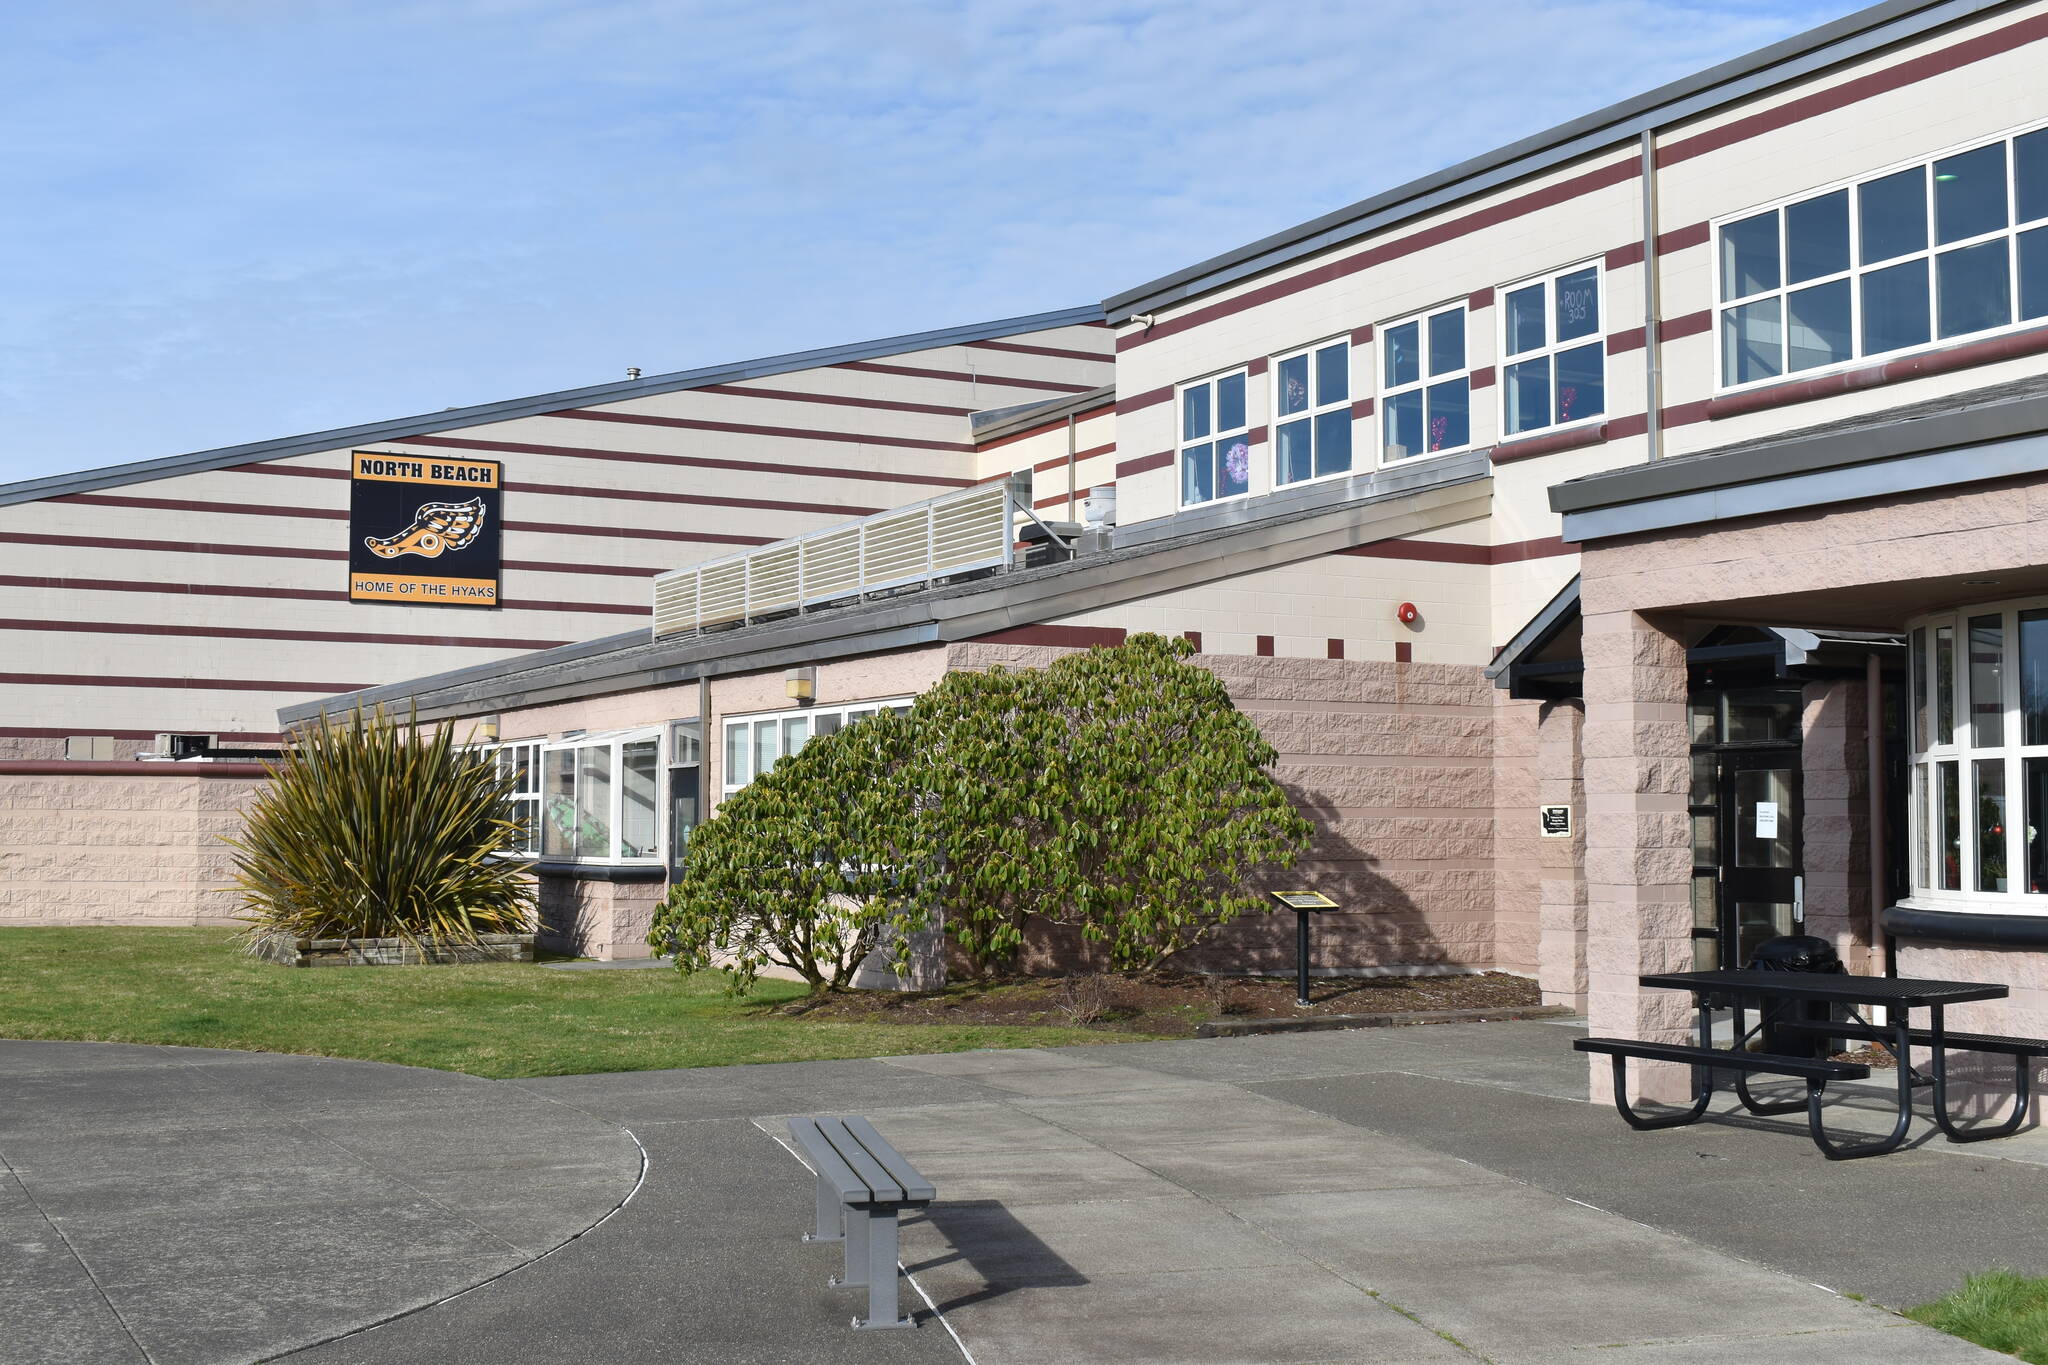 The Daily World file photo
Officials aim to open school-based health center, which will provide primary care for students and staff in the North Beach School District, at North Beach Middle/High School for the start of the 2023/2024 school year.